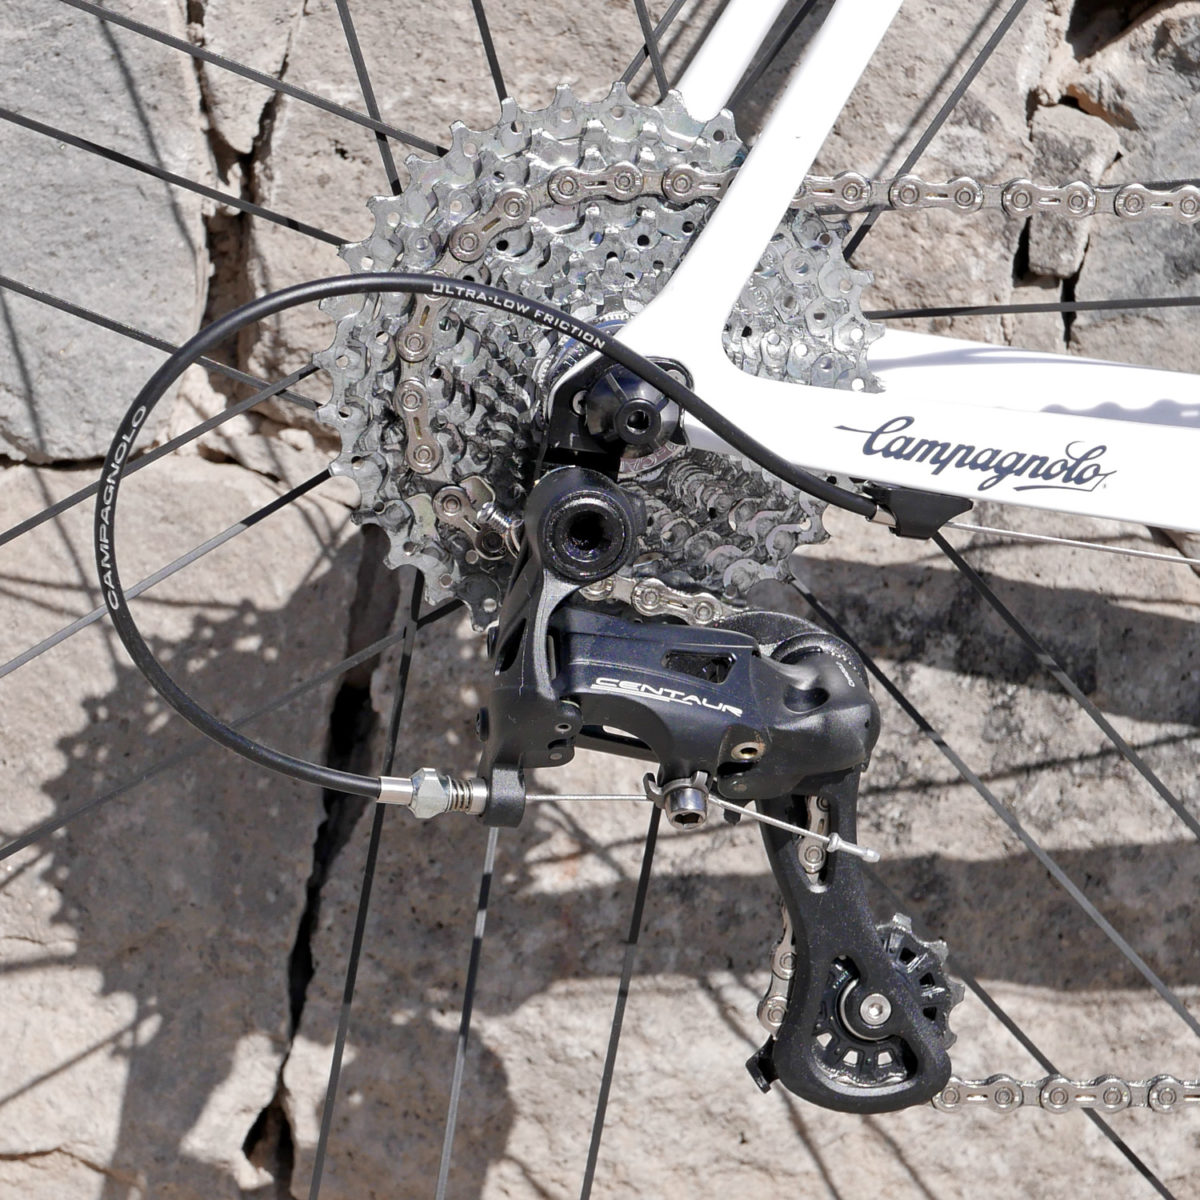 Campagnolo Centaur returns more affordable alloy offerings for all road bikes – Updated